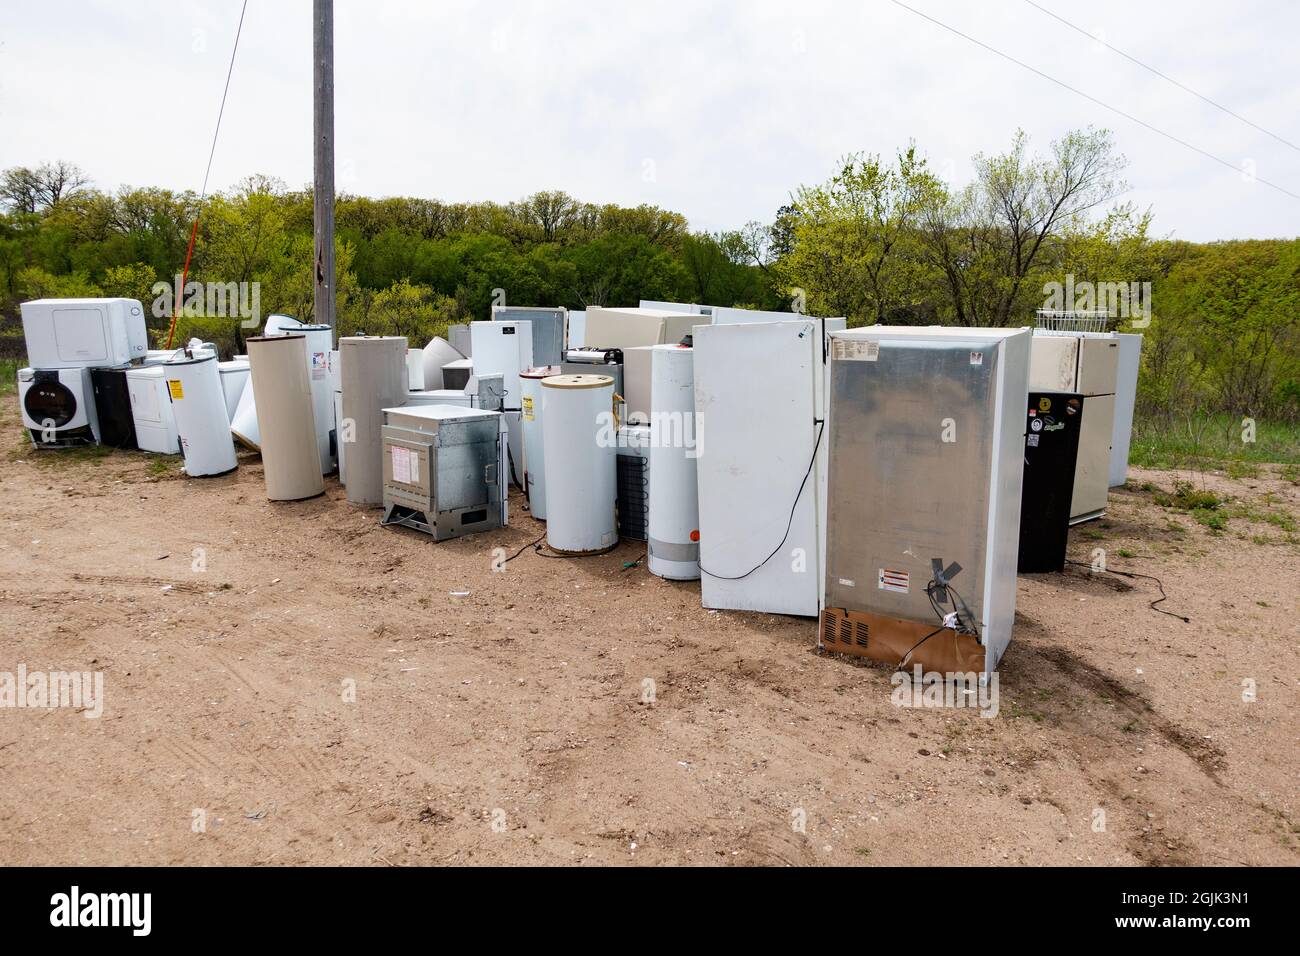 Group of not working white appliances at the Dump for recycling. Battle Lake Minnesota MN USA Stock Photo